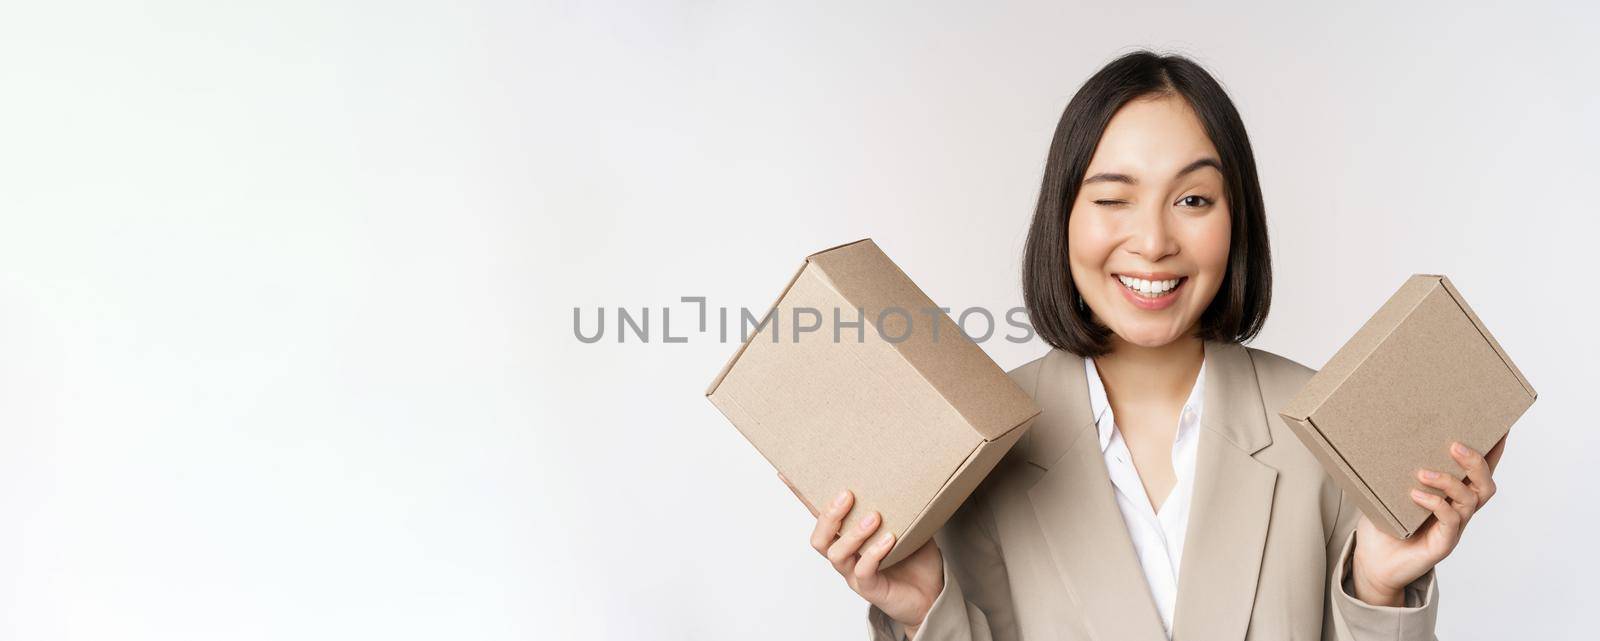 Image of saleswoman, asian businesswoman holding boxes with company brand product, smiling at camera, standing against white background.